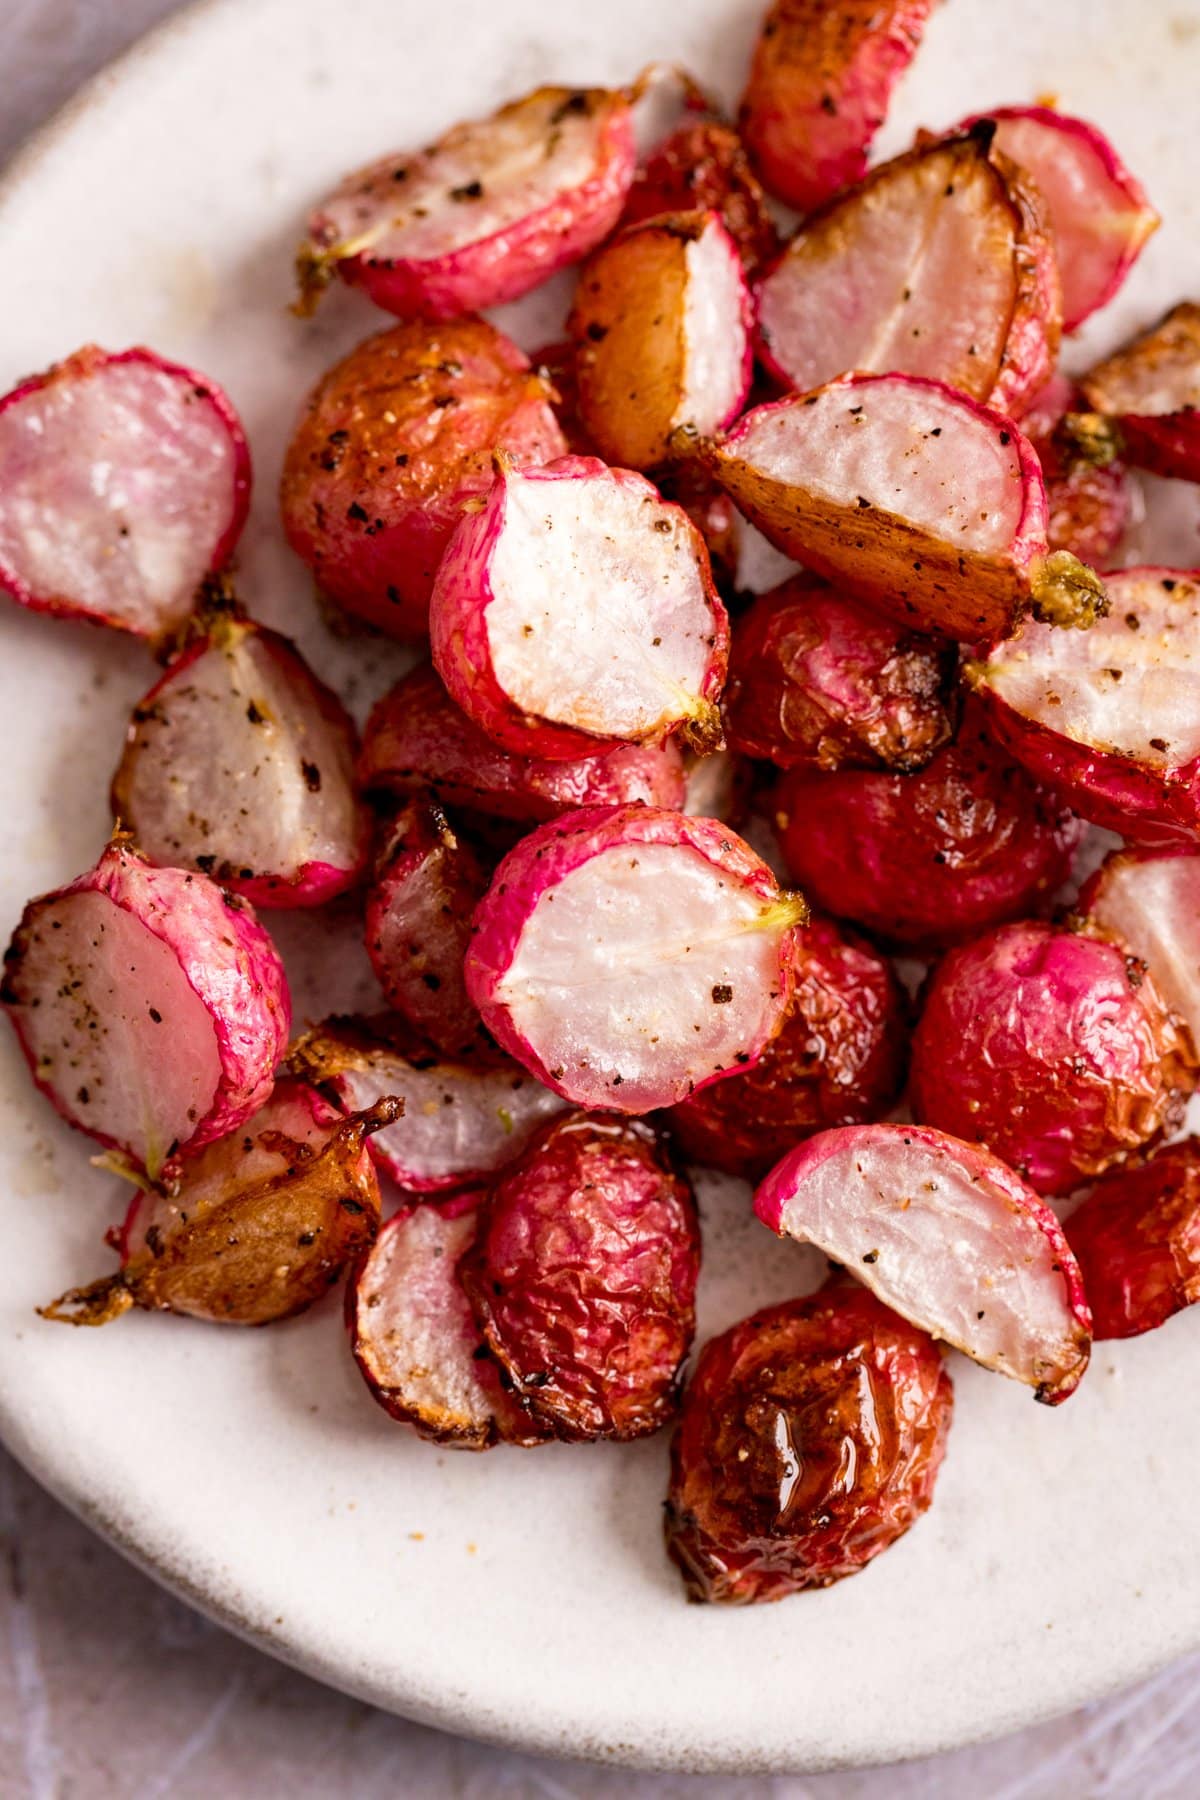 Roasted radishes on a white plate.